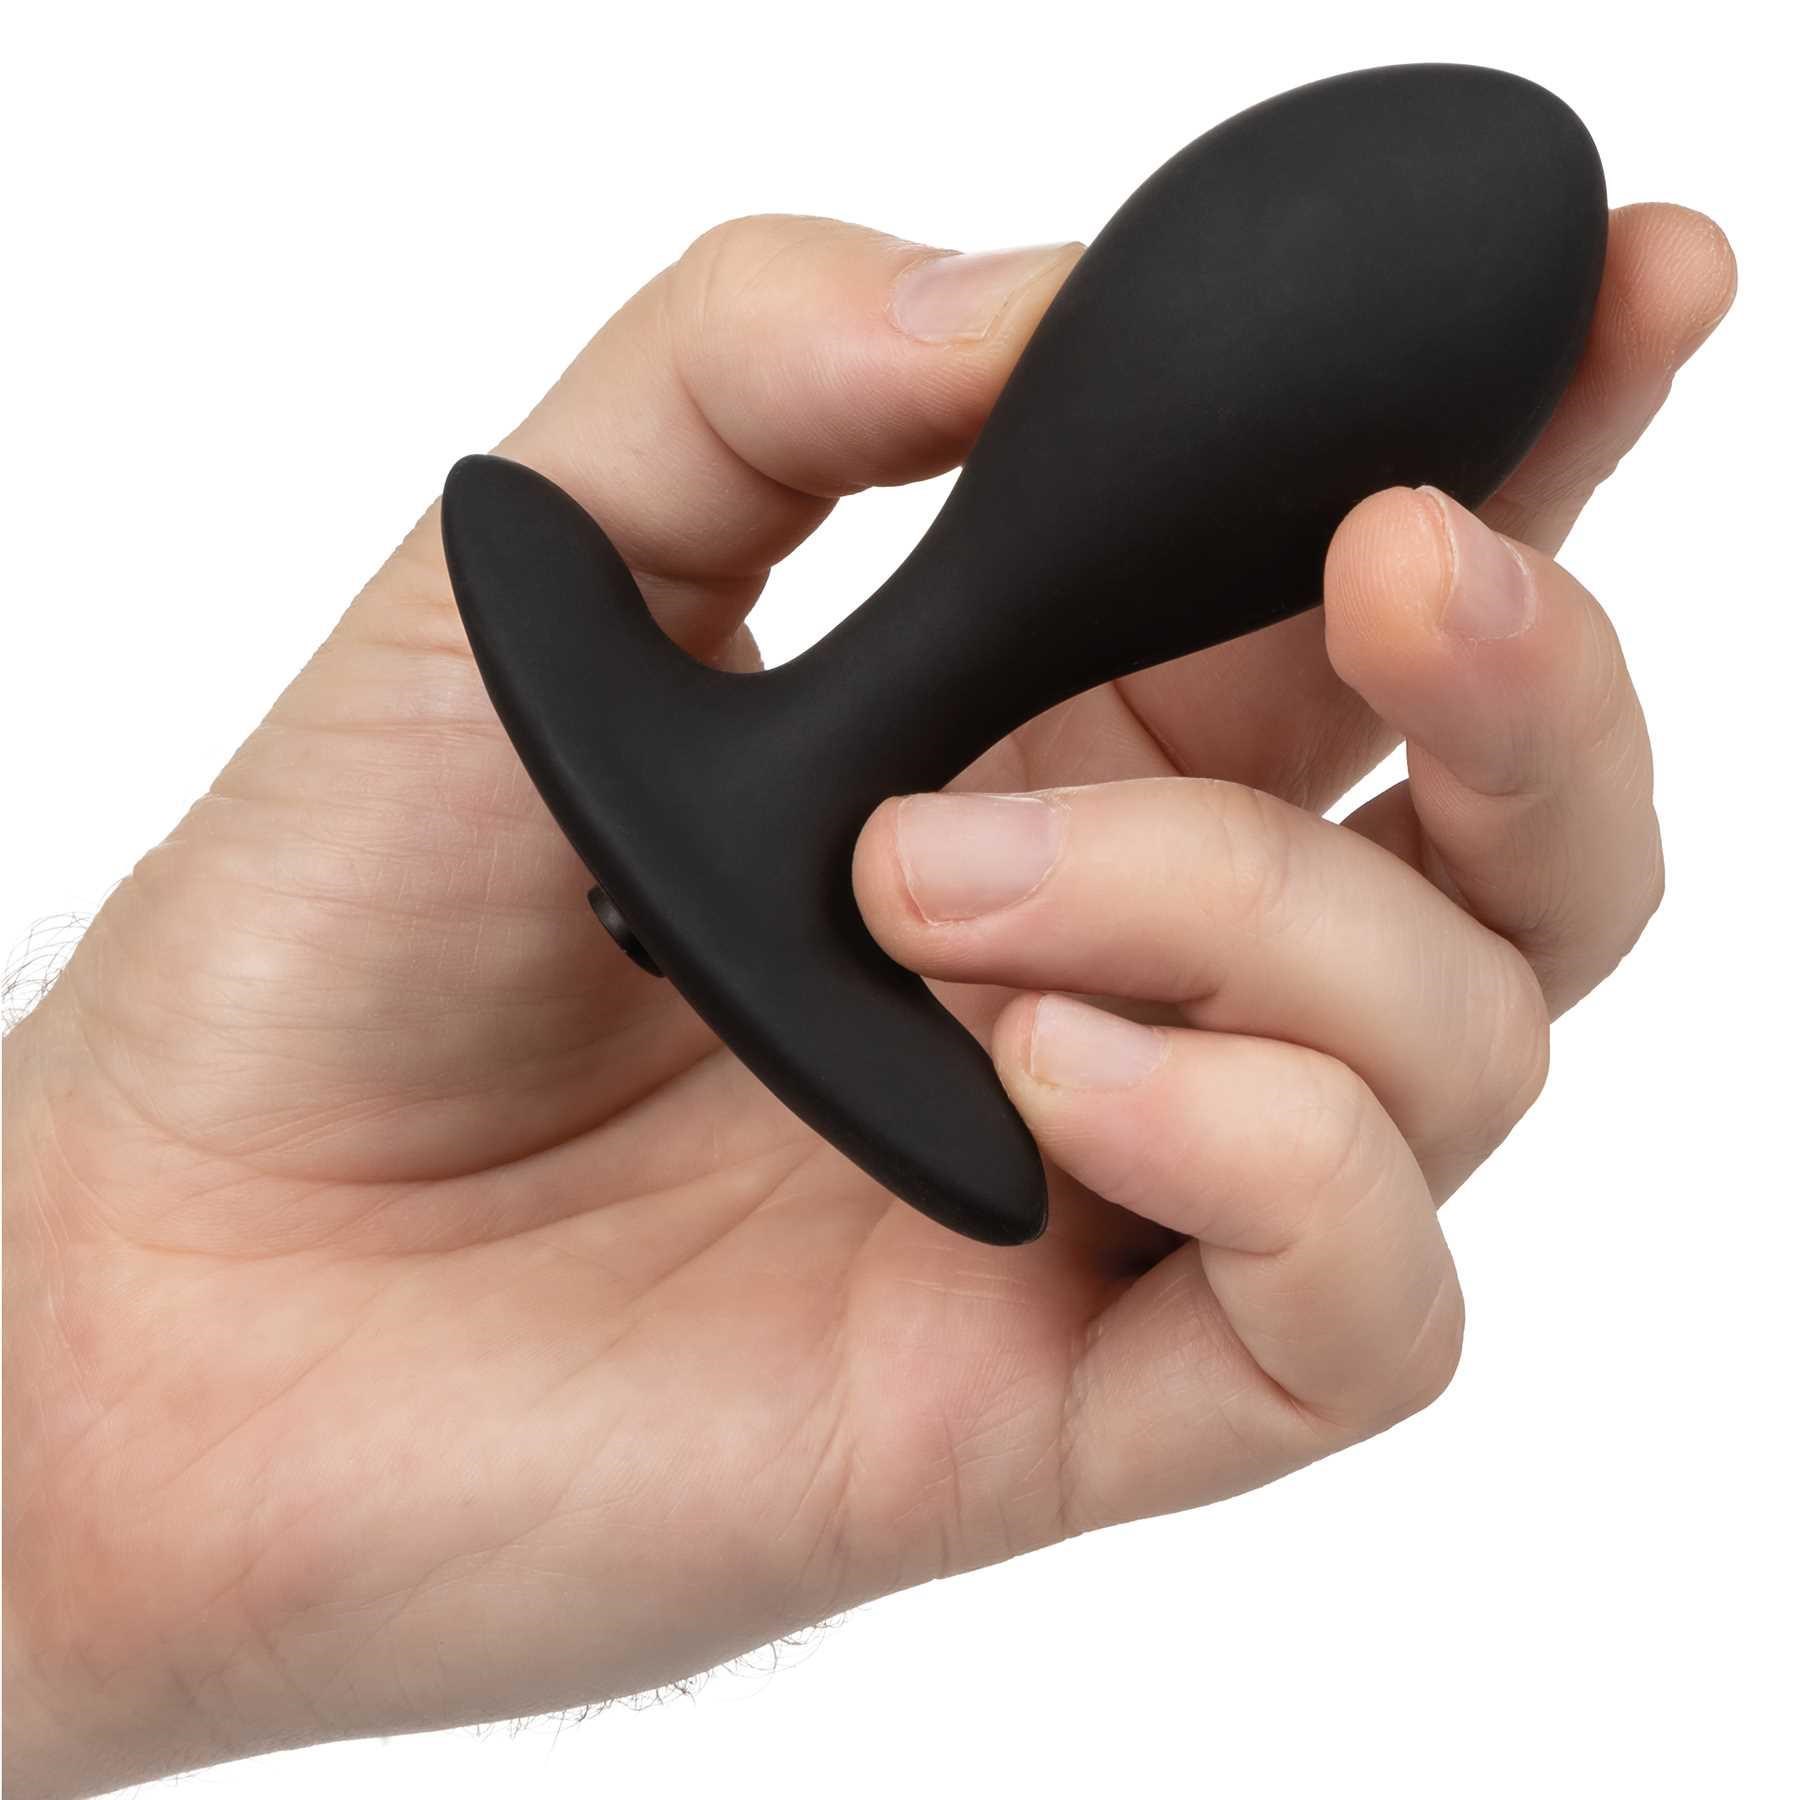 weighted silicone inflatable plug hand shot